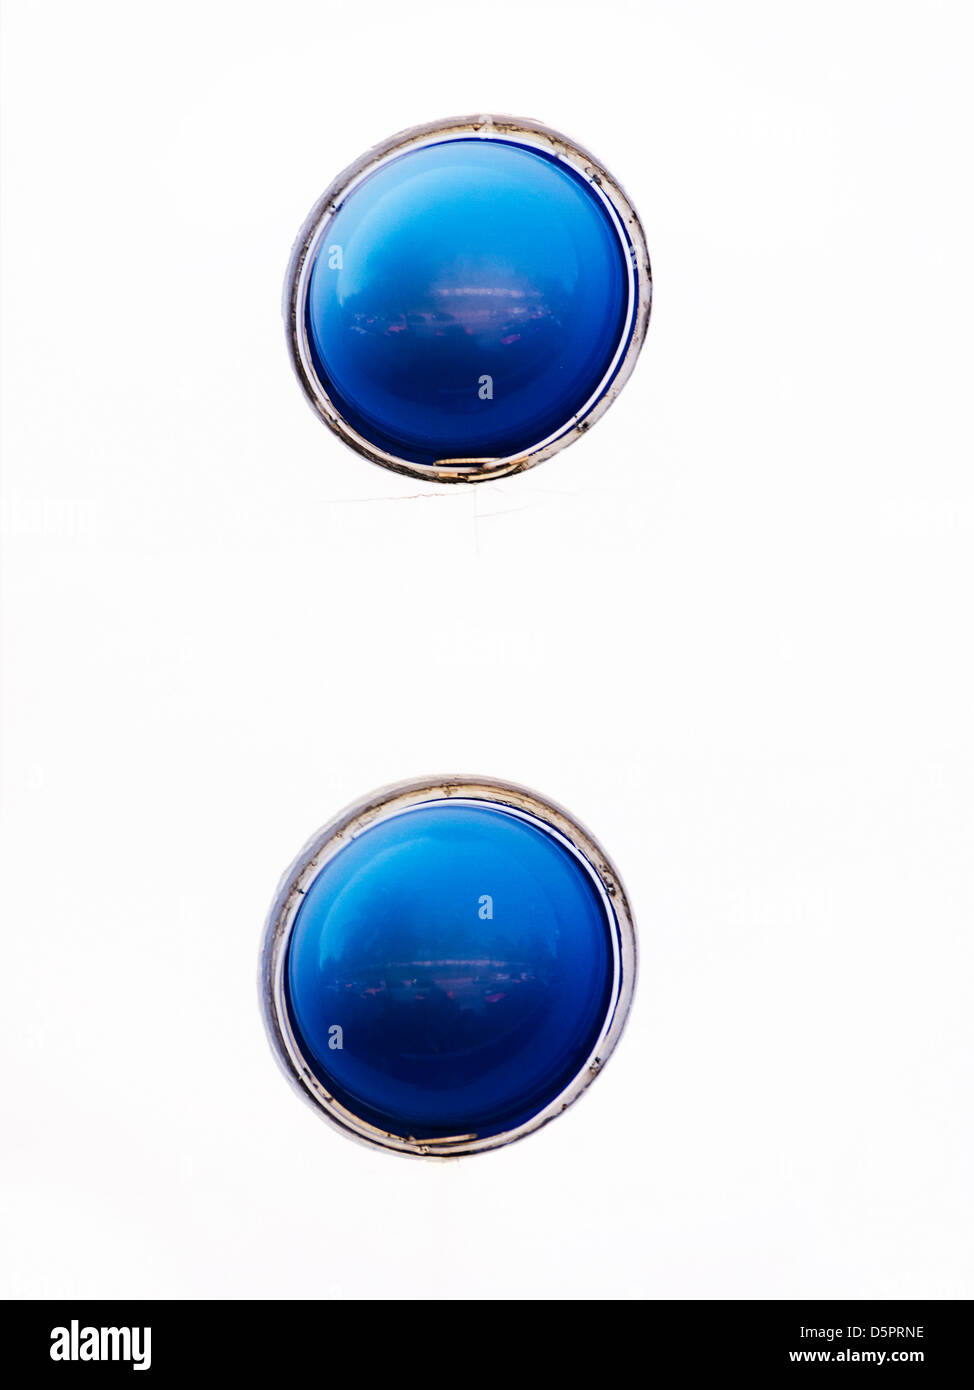 Two Blue Window Domes Abstract Stock Photo